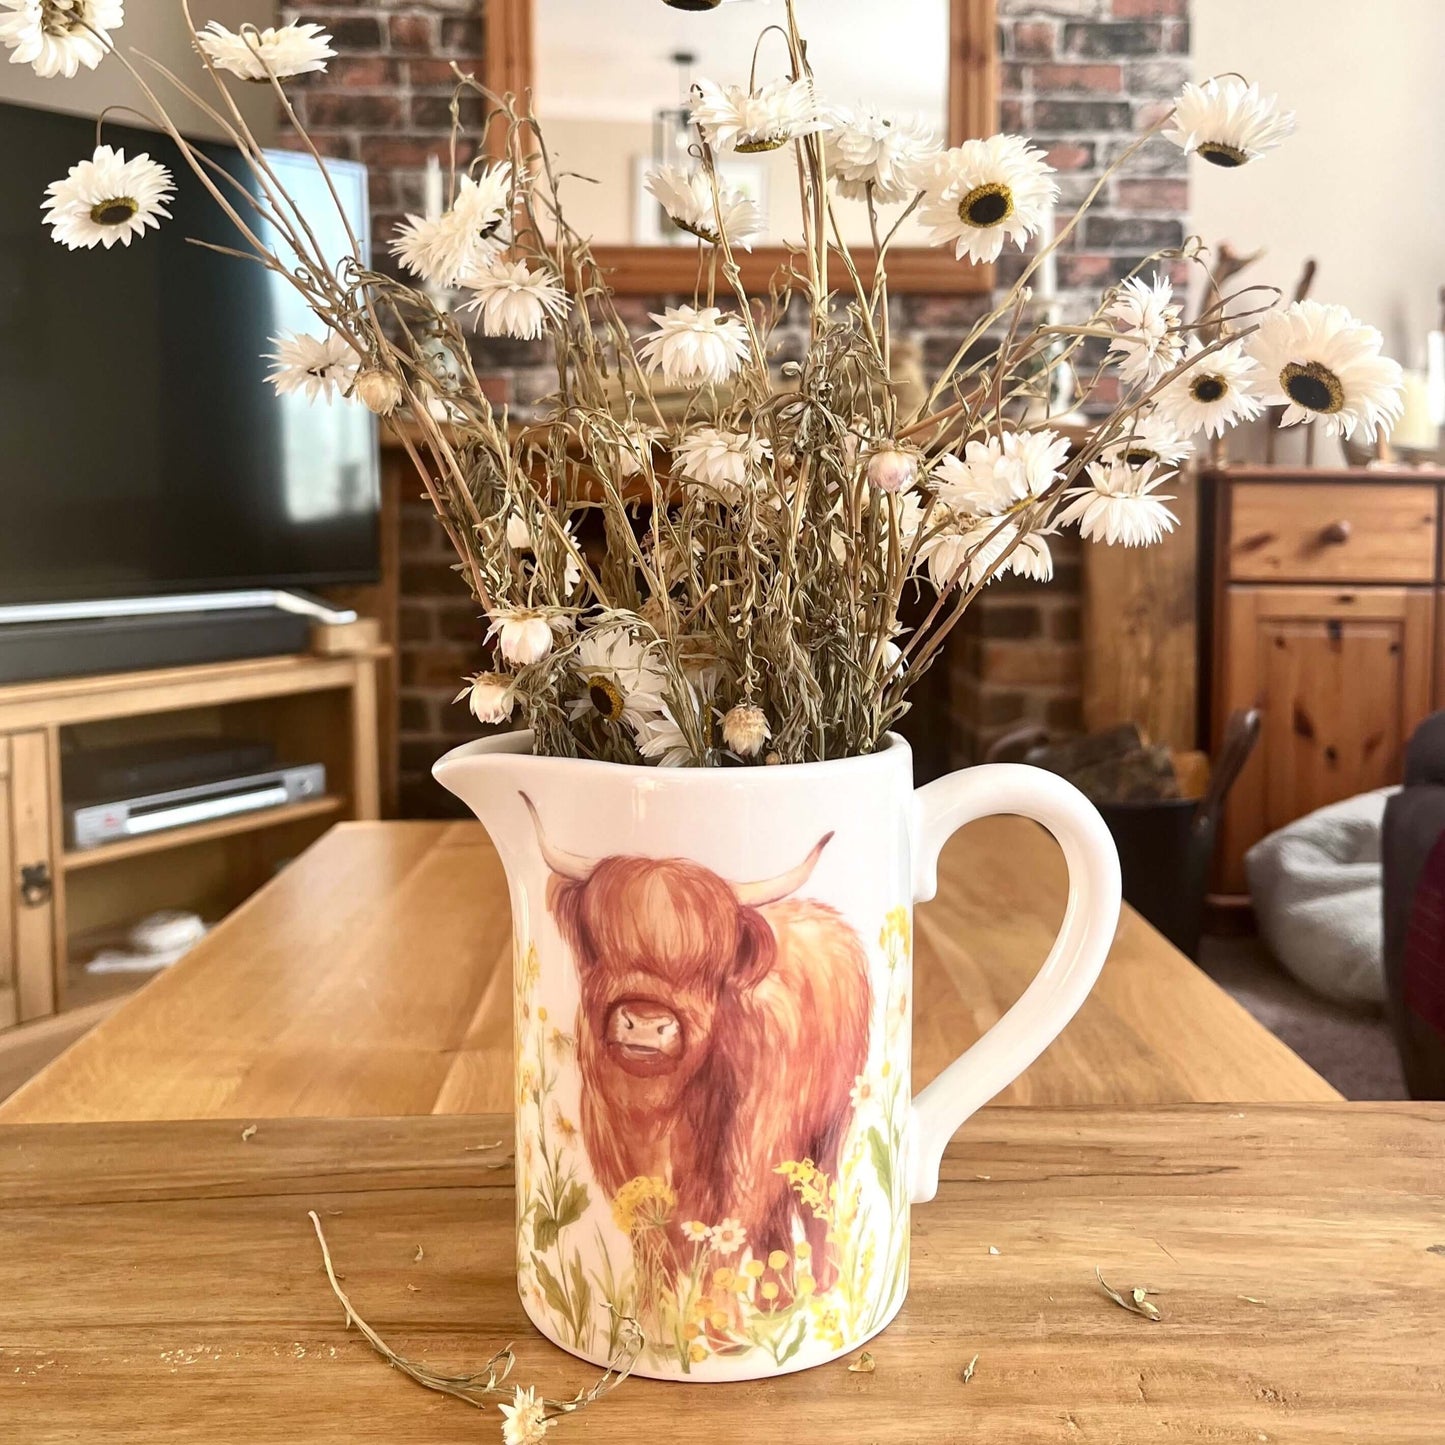 Spring Highland Cow Jug With Dried Flowers Display